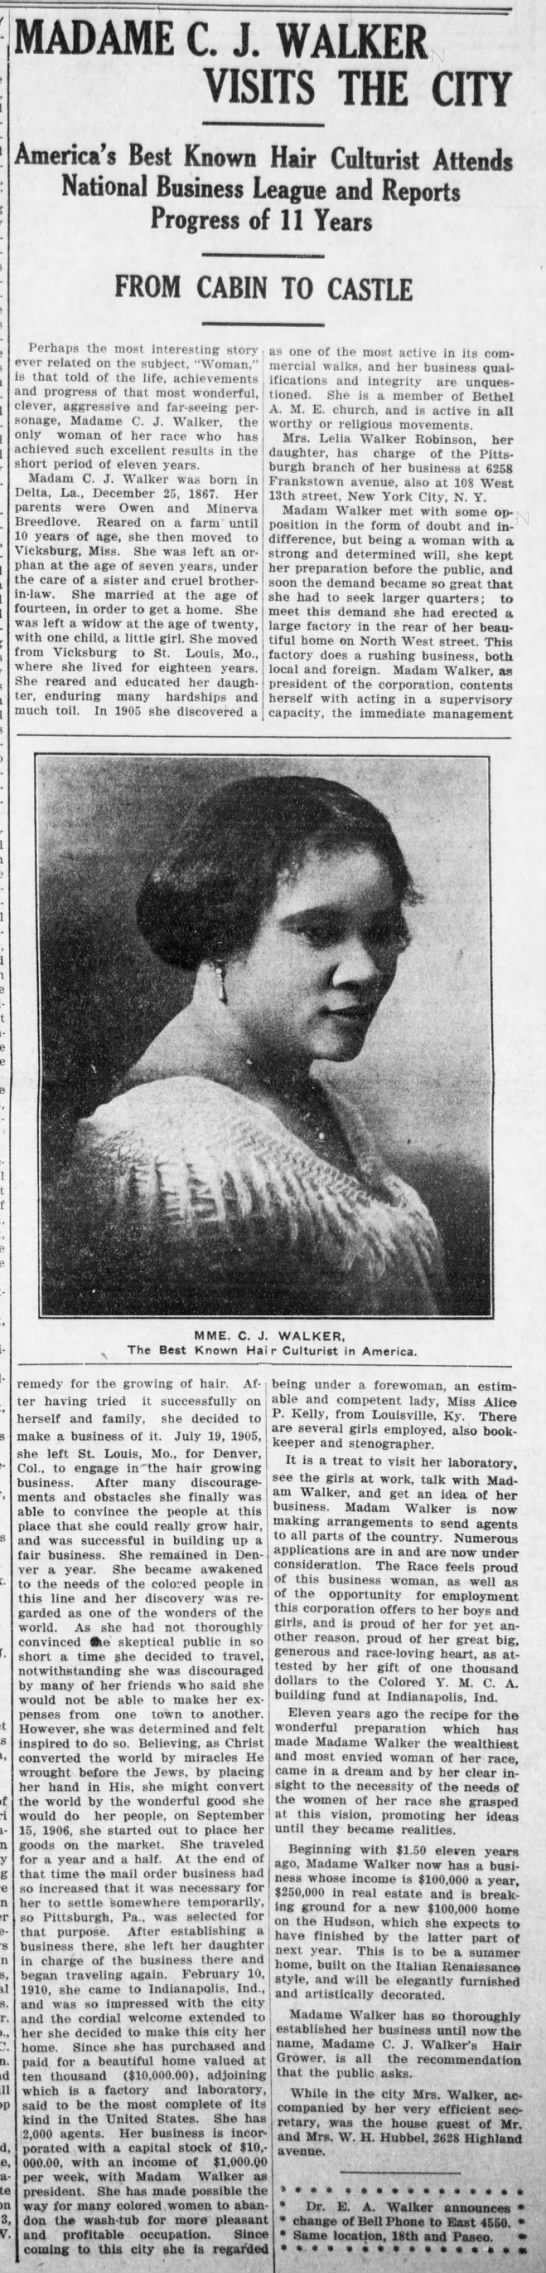 Biography of Madam C.J. Walker from 1916 with a picture - 